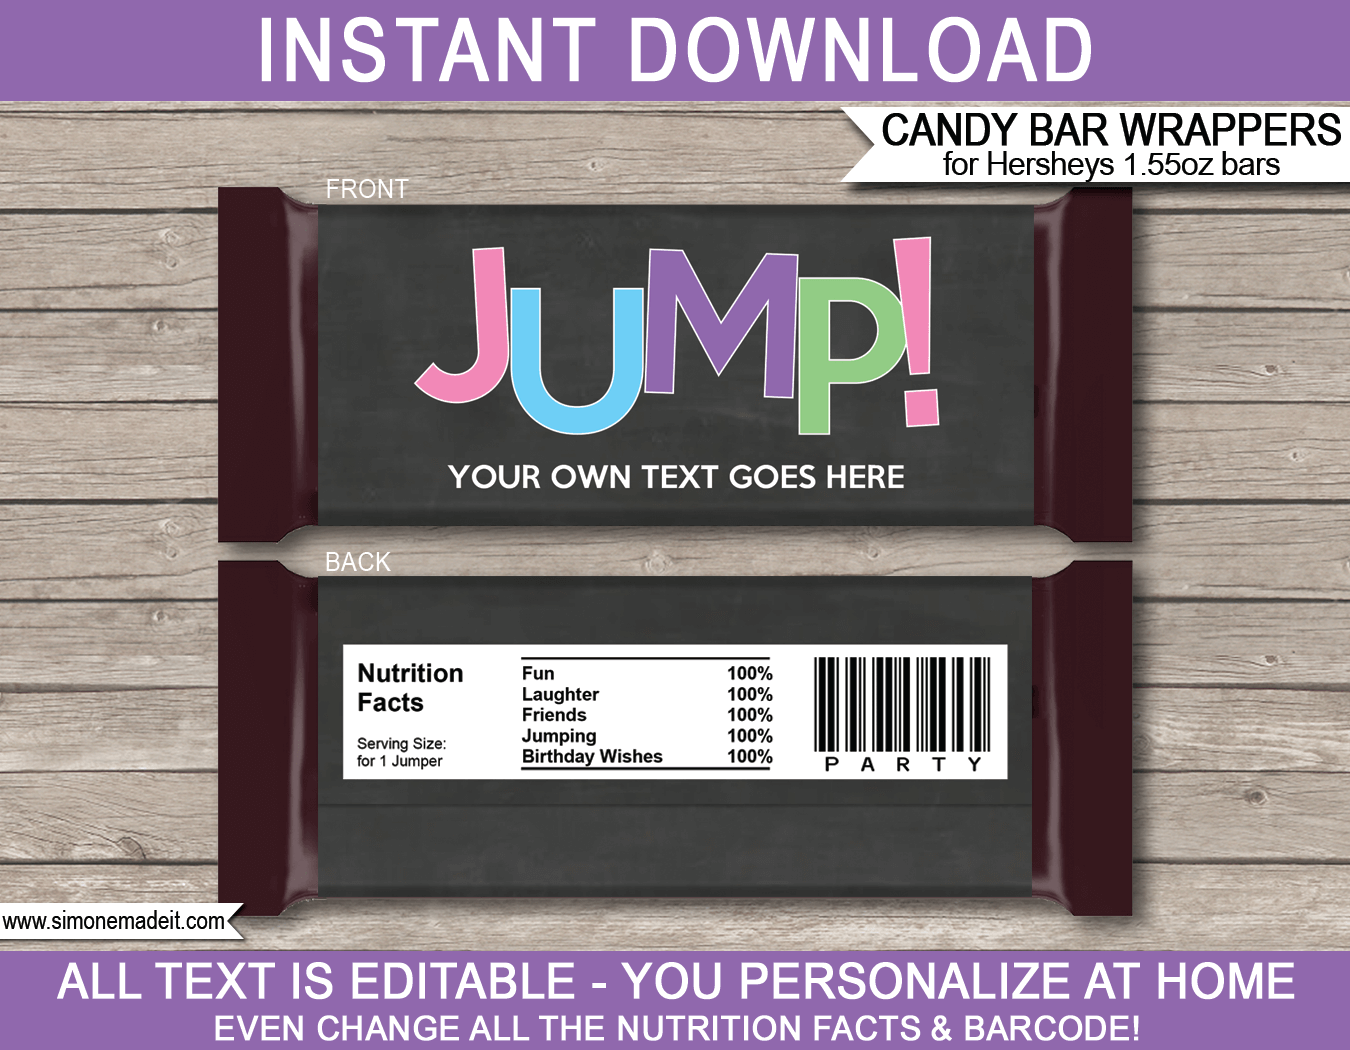 Trampoline Party Hershey Candy Bar Wrappers | Jump | Birthday Party Favors | Personalized Candy Bars | Editable Template | INSTANT DOWNLOAD $3.00 via simonemadeit.com